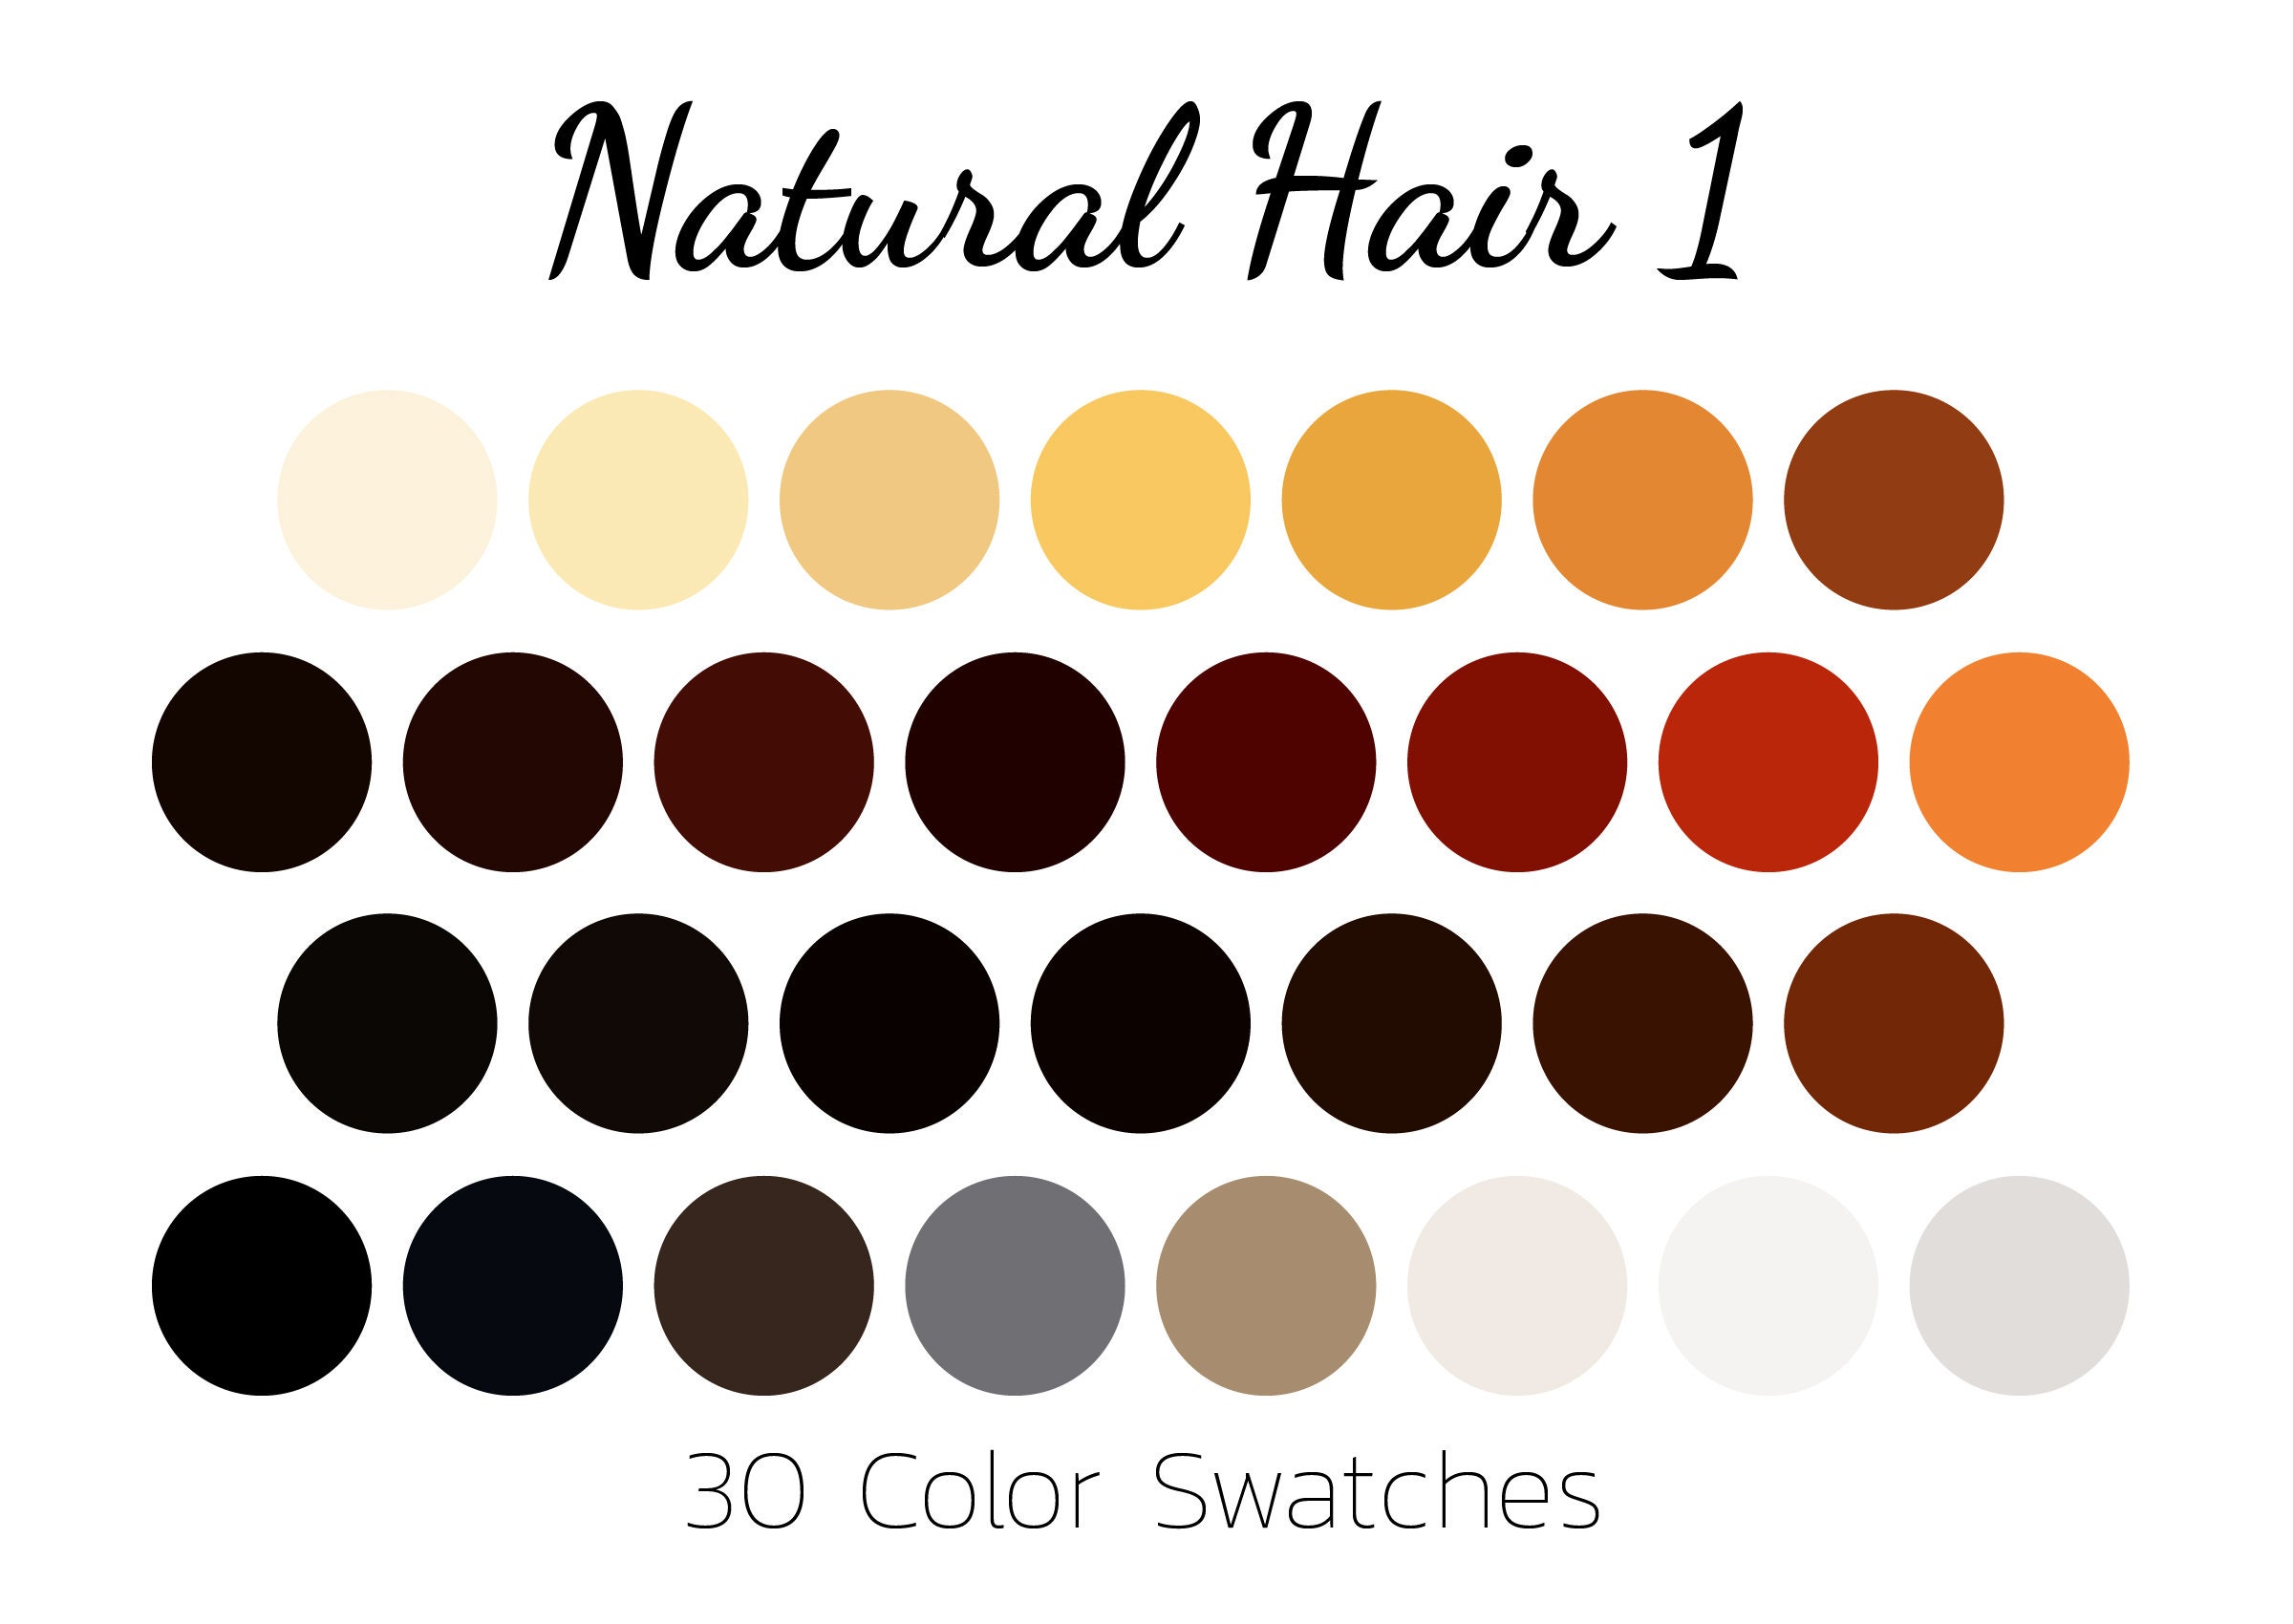 Natural Hair 1 Color Swatches Color Palette Ipad | Etsy